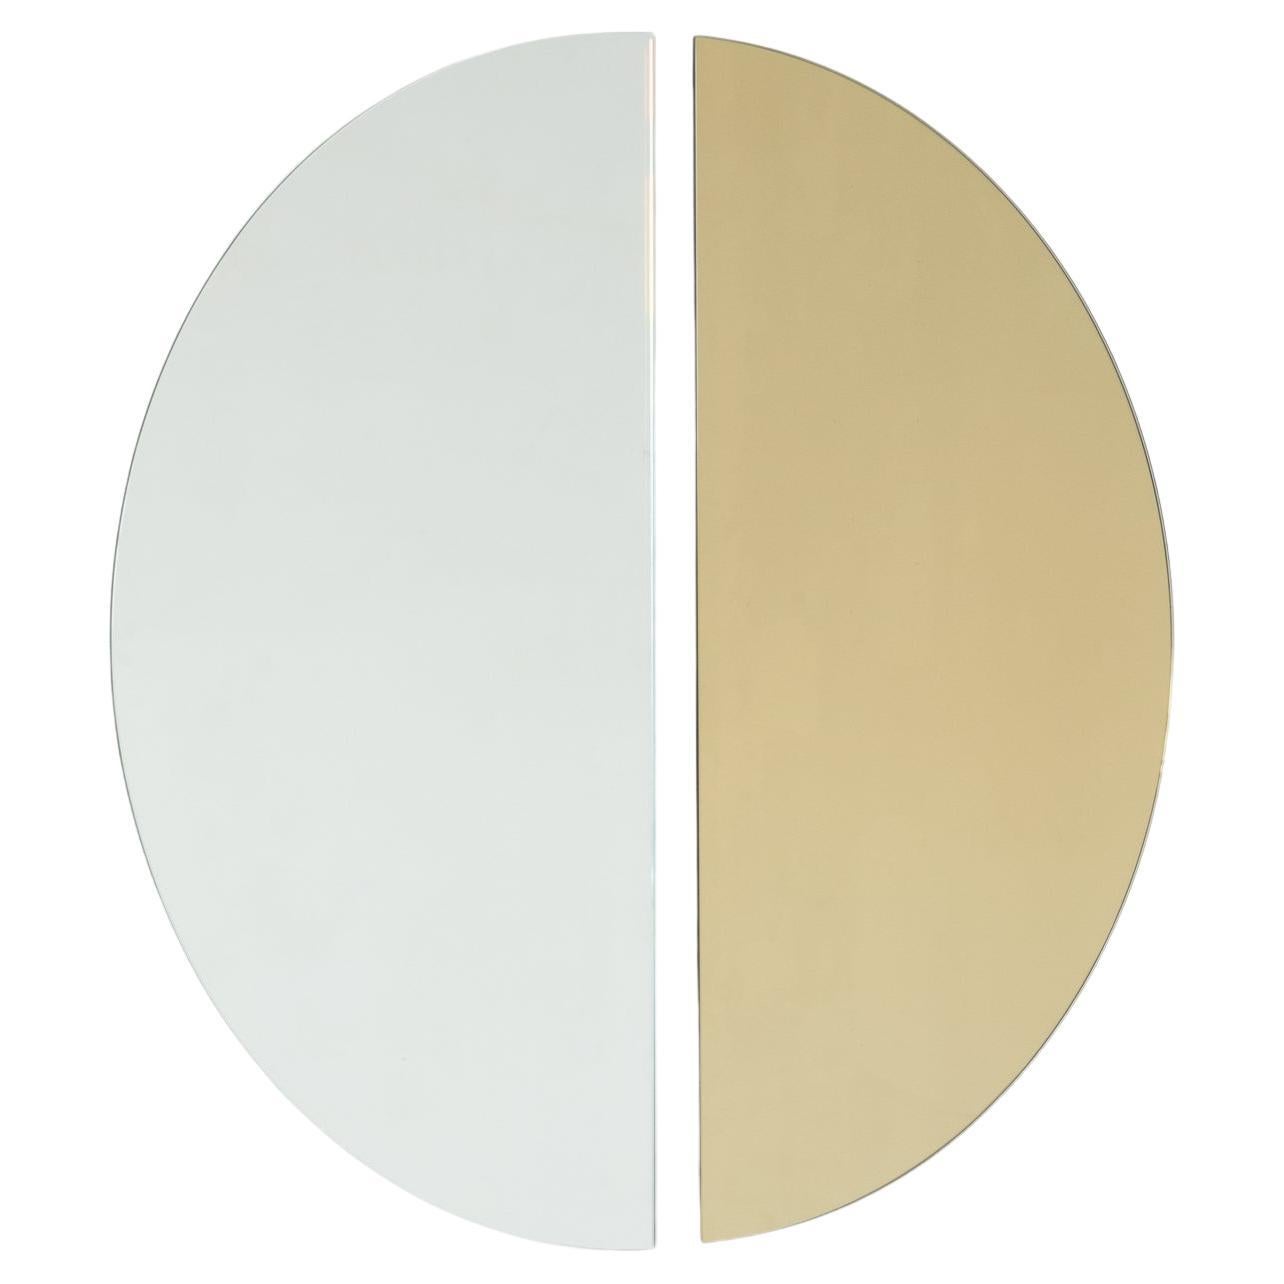 Set of 2 Luna Half-Moon Silver + Gold Minimalist Round Frameless Mirrors, Large For Sale